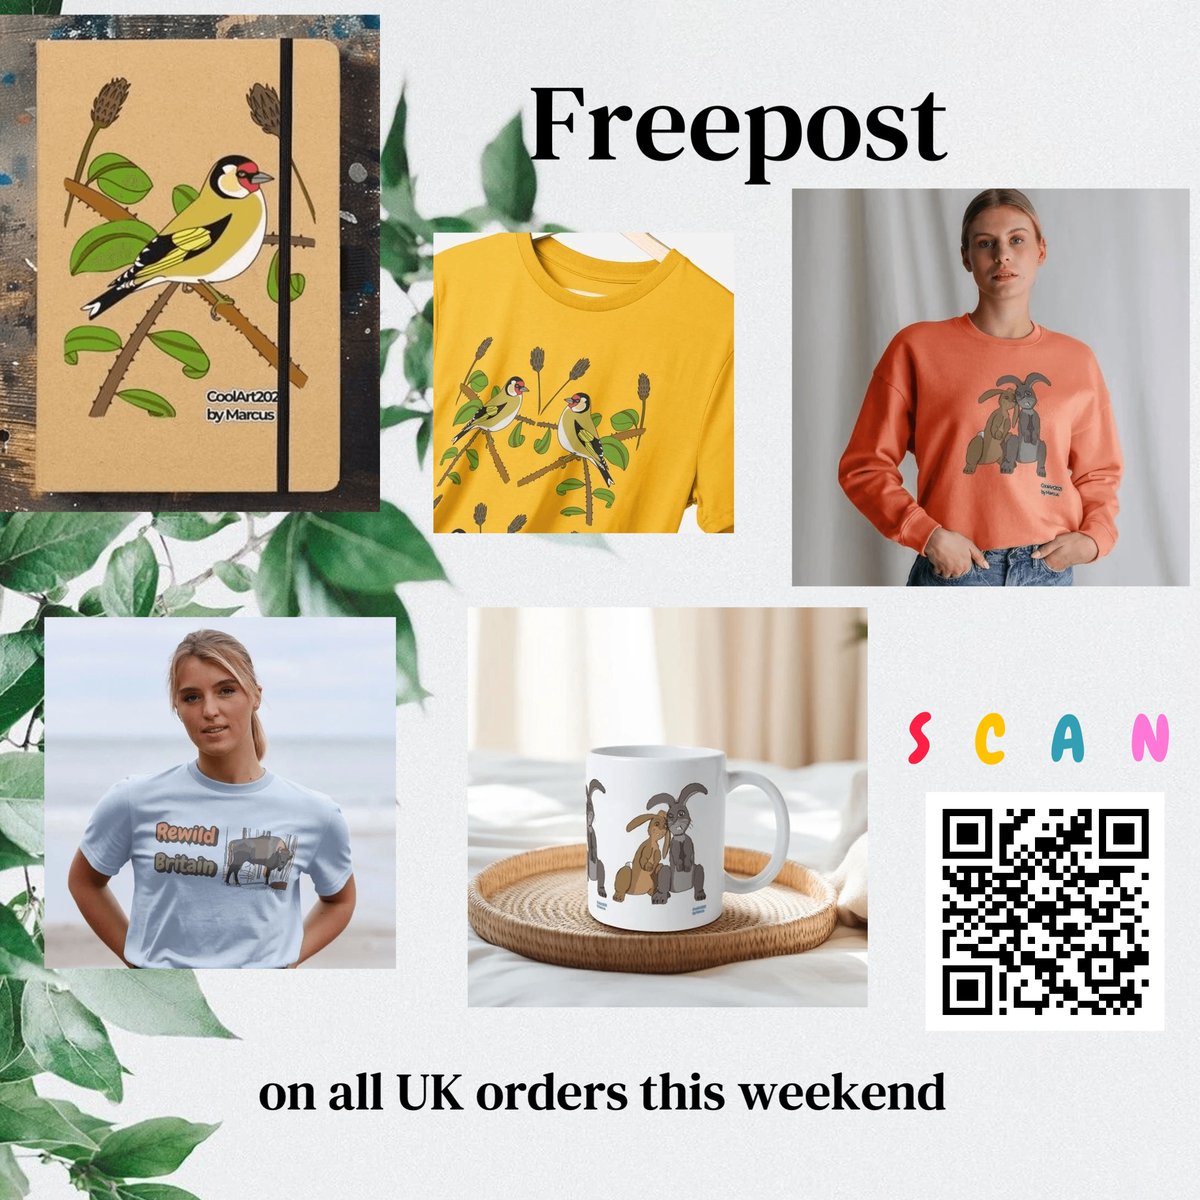 #Freepost upto midnight today, customers get free UK shipping automatically applied at checkout #EcoFriendly #Gifts #AutisticArtist #ChooseToInclude #InclusionRevolution #SmallBusiness #Disabled #MondayMood #BankHoliday #MondayVibes 
@ParallelGlobal
@lilacreviewuk
@SmallBizSatUk